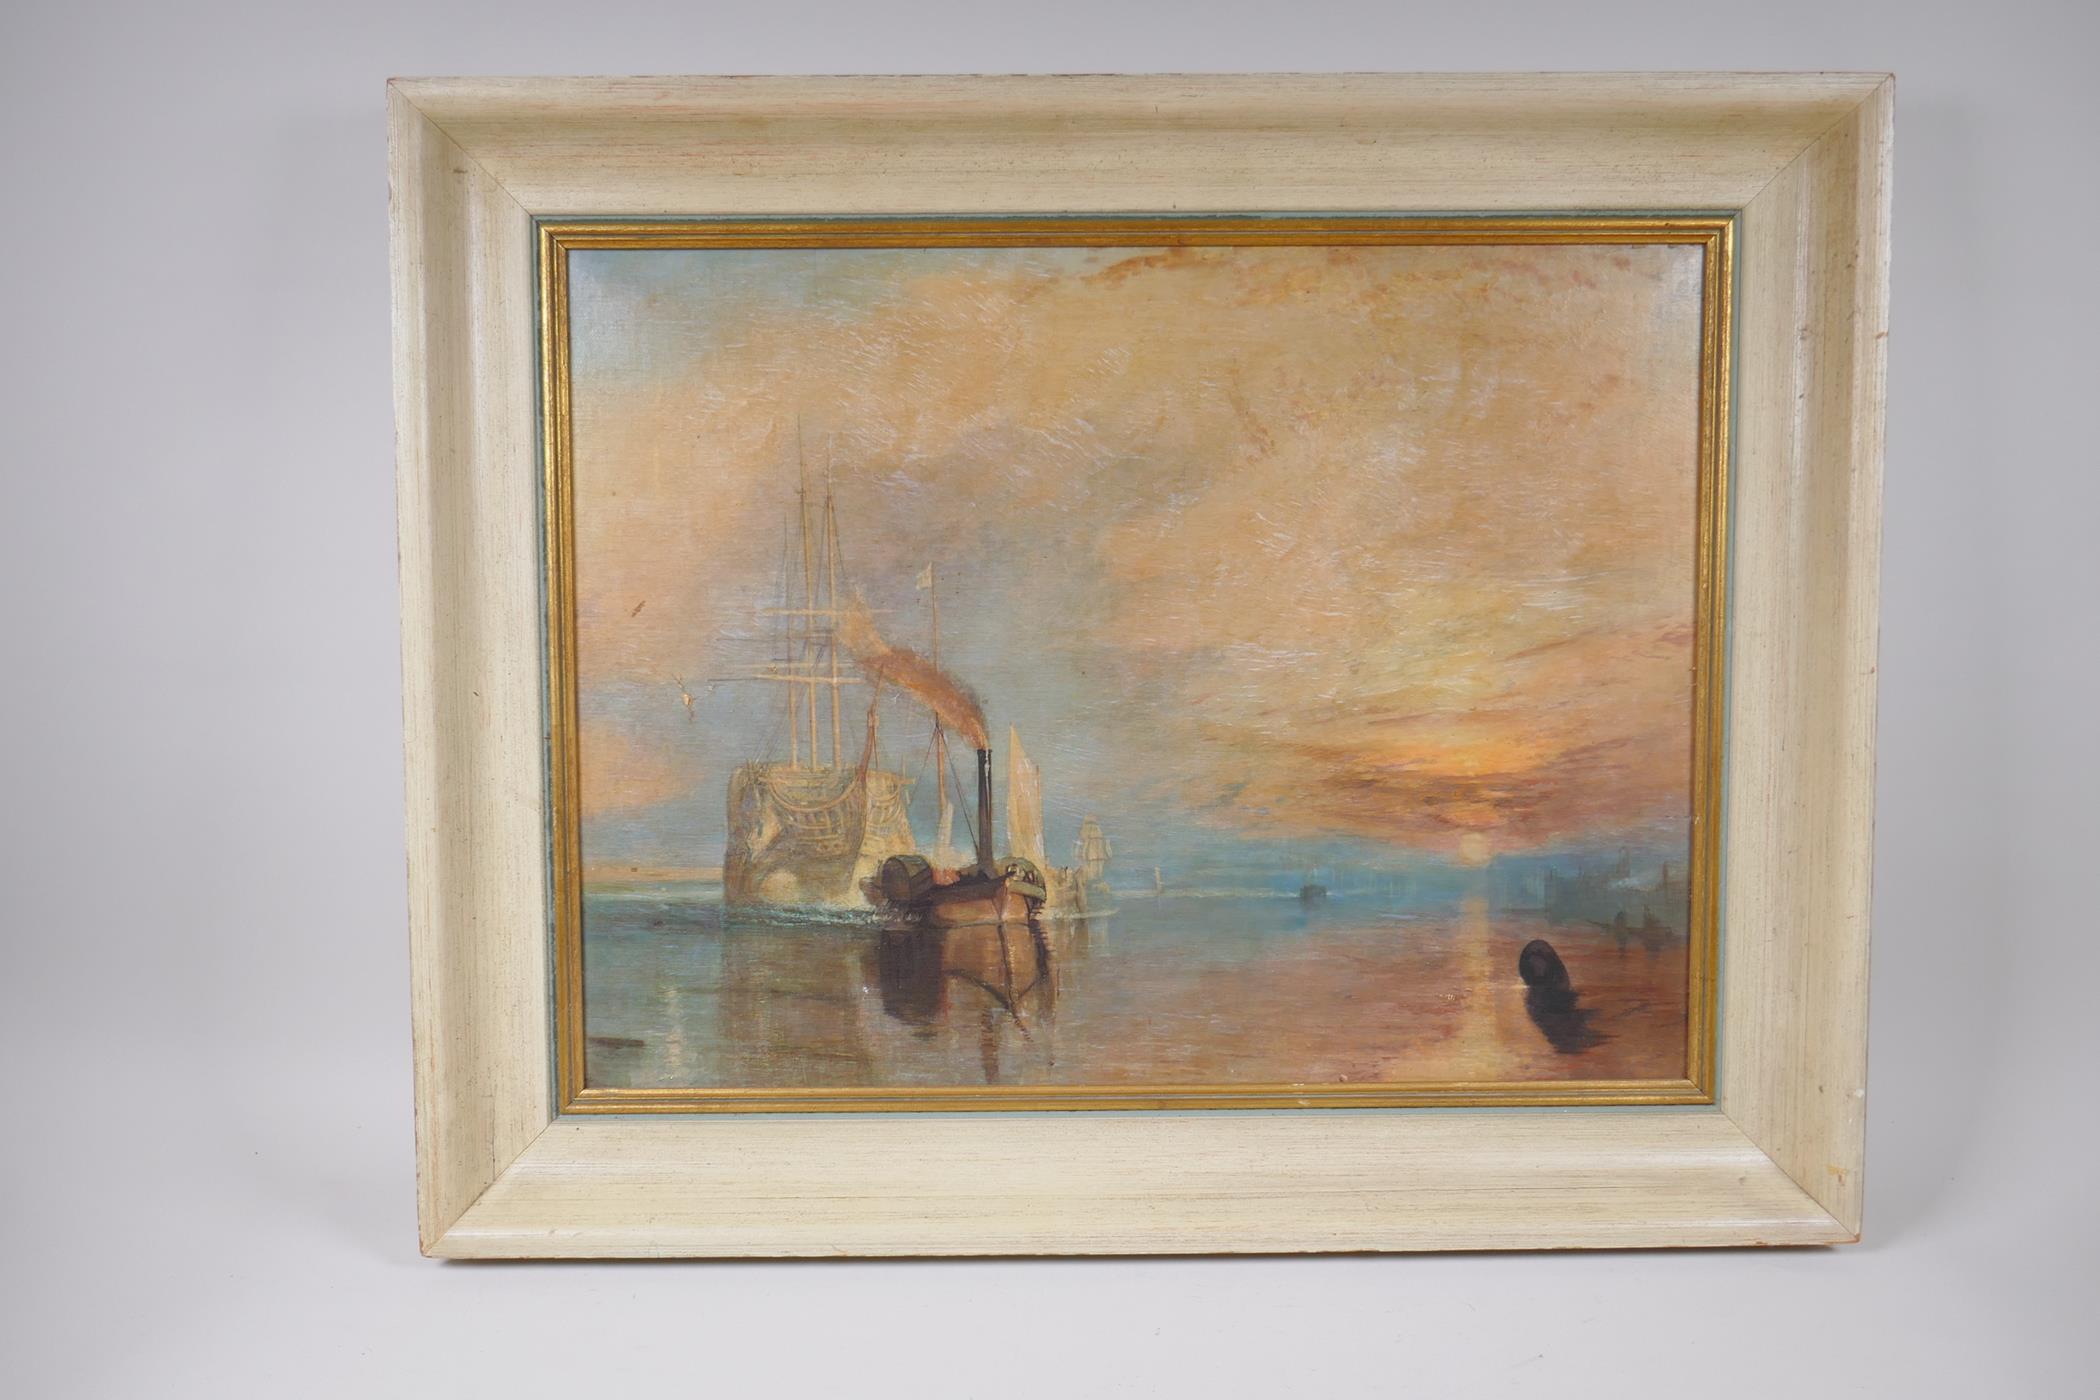 After Turner, The Fighting Temeraire, Fiehl reproduction print on canvas, 57 x 43cm - Image 2 of 5